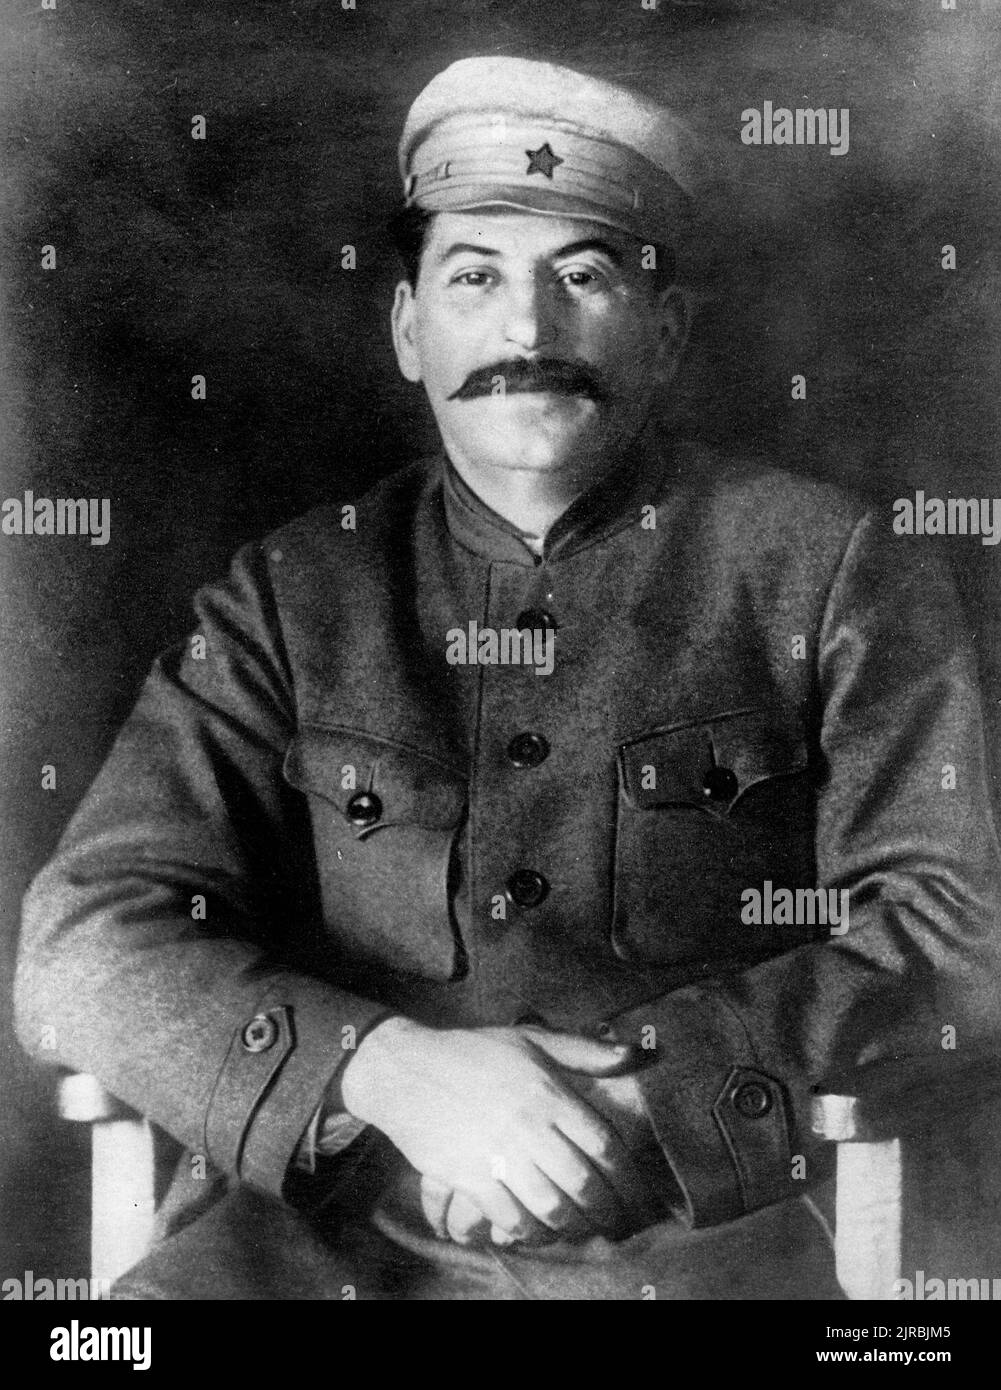 A photograph of Stalin, according to info published in journal Kommunist, taken in 1920. Stock Photo